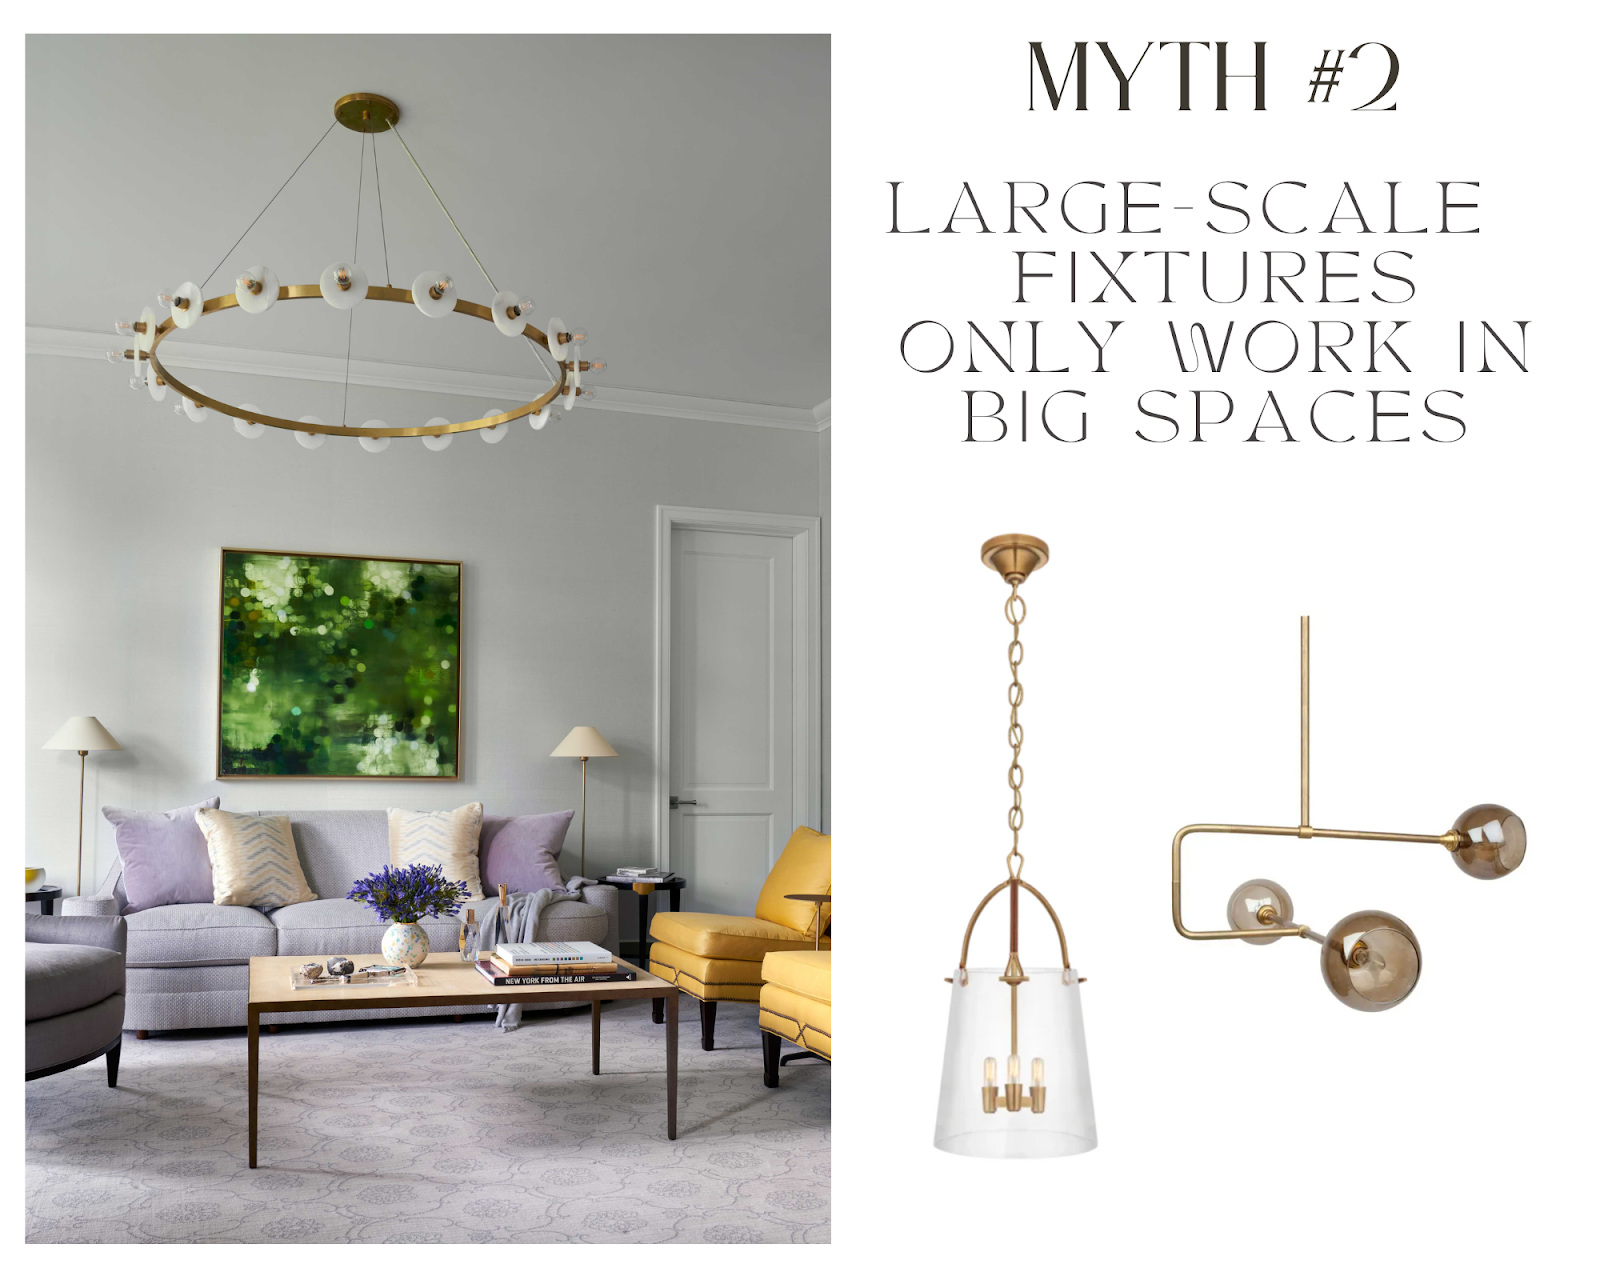 Another Myth: Large-Scale Fixtures Only Work in Sizeable Spaces